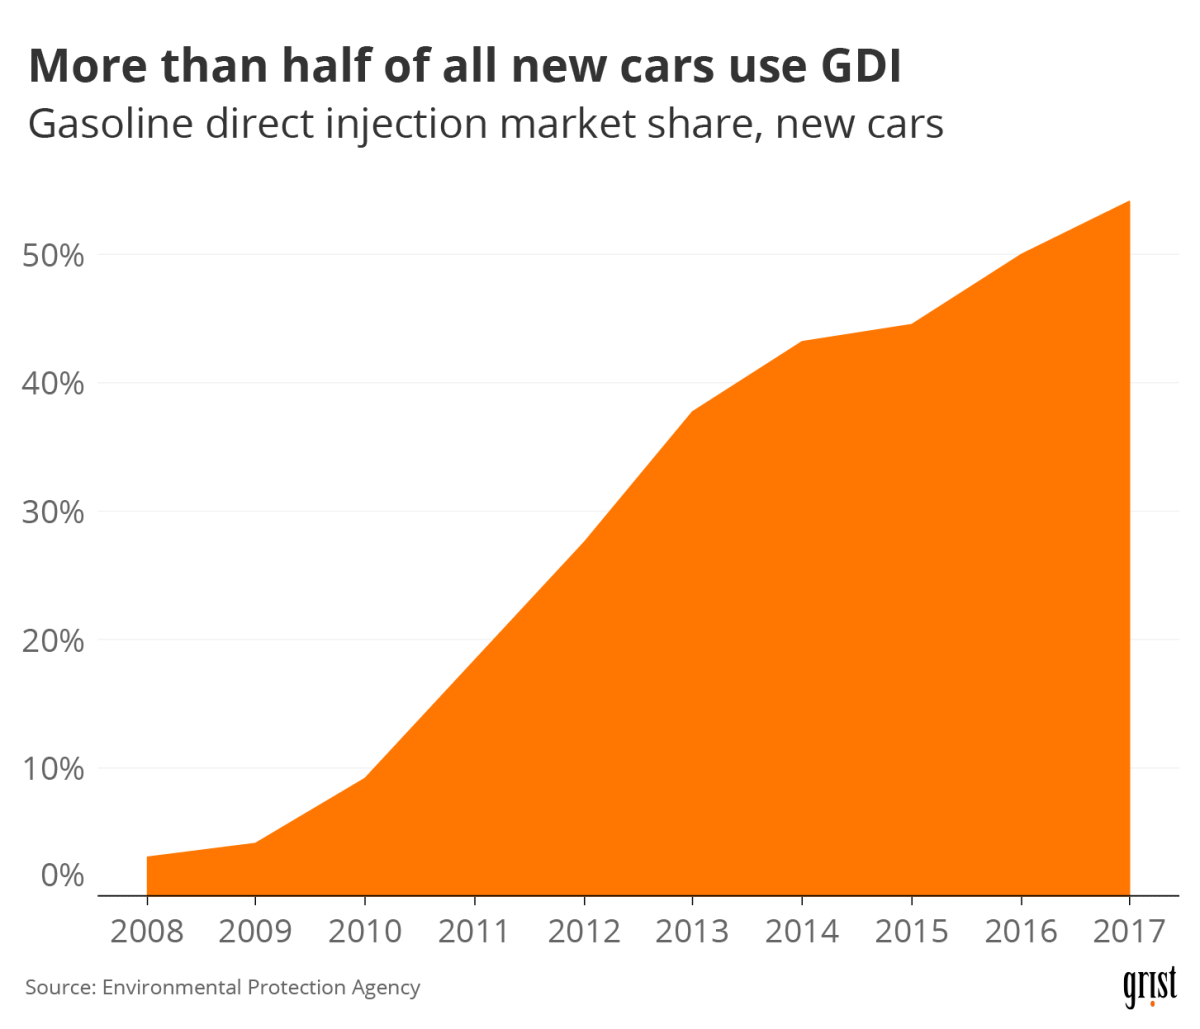 An area chart showing increasing market share of gasoline direct injection in new cars between 2008 and 2017